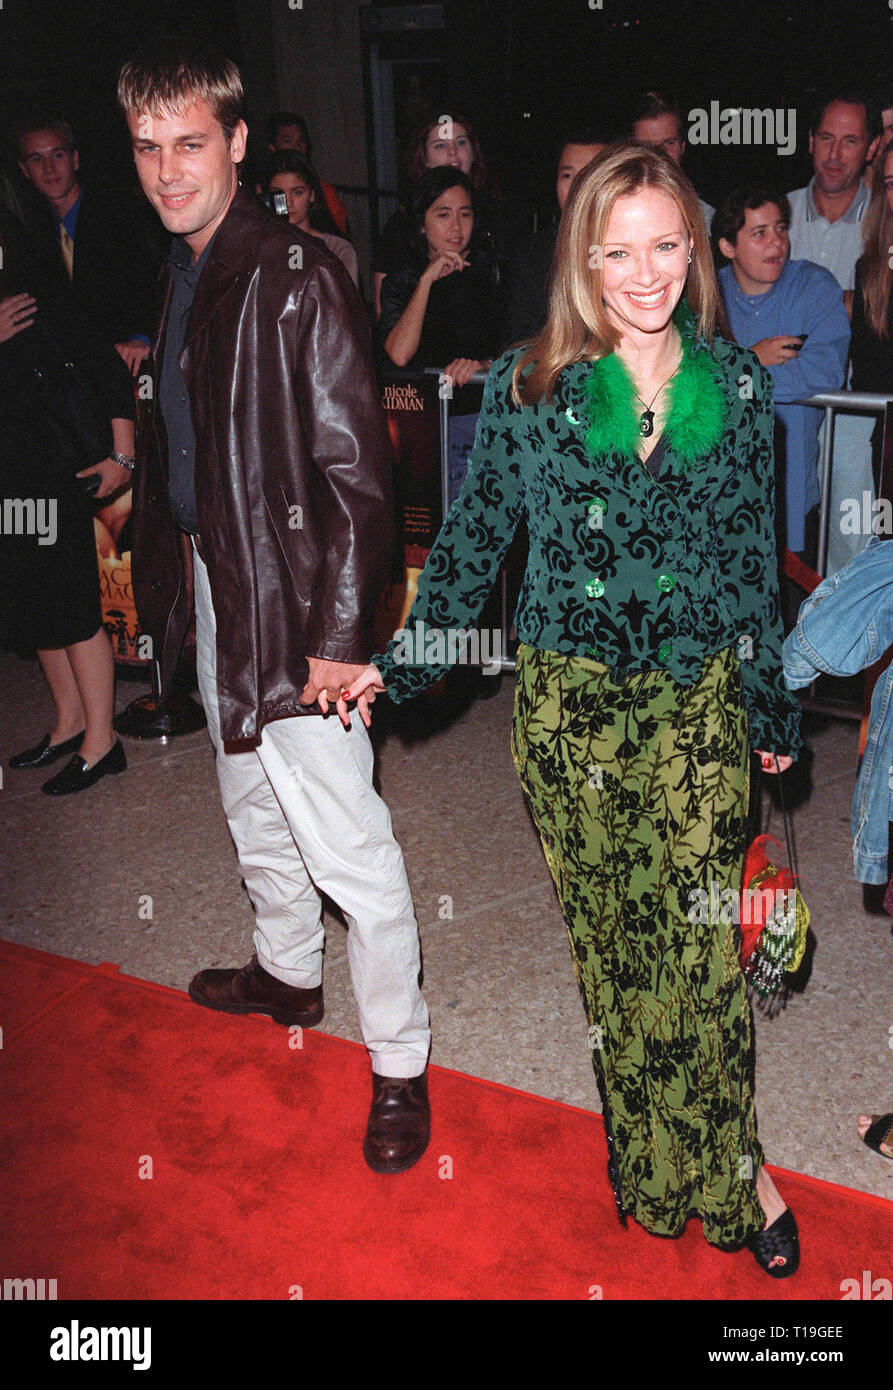 LOS ANGELES, CA - October 13, 1998:  Actress LAUREN HOLLY & date at the Los Angeles premiere of  'Practical Magic' which stars Sandra Bullock, Nicole Kidman, Aidan Quinn & Stockard Channing. Stock Photo